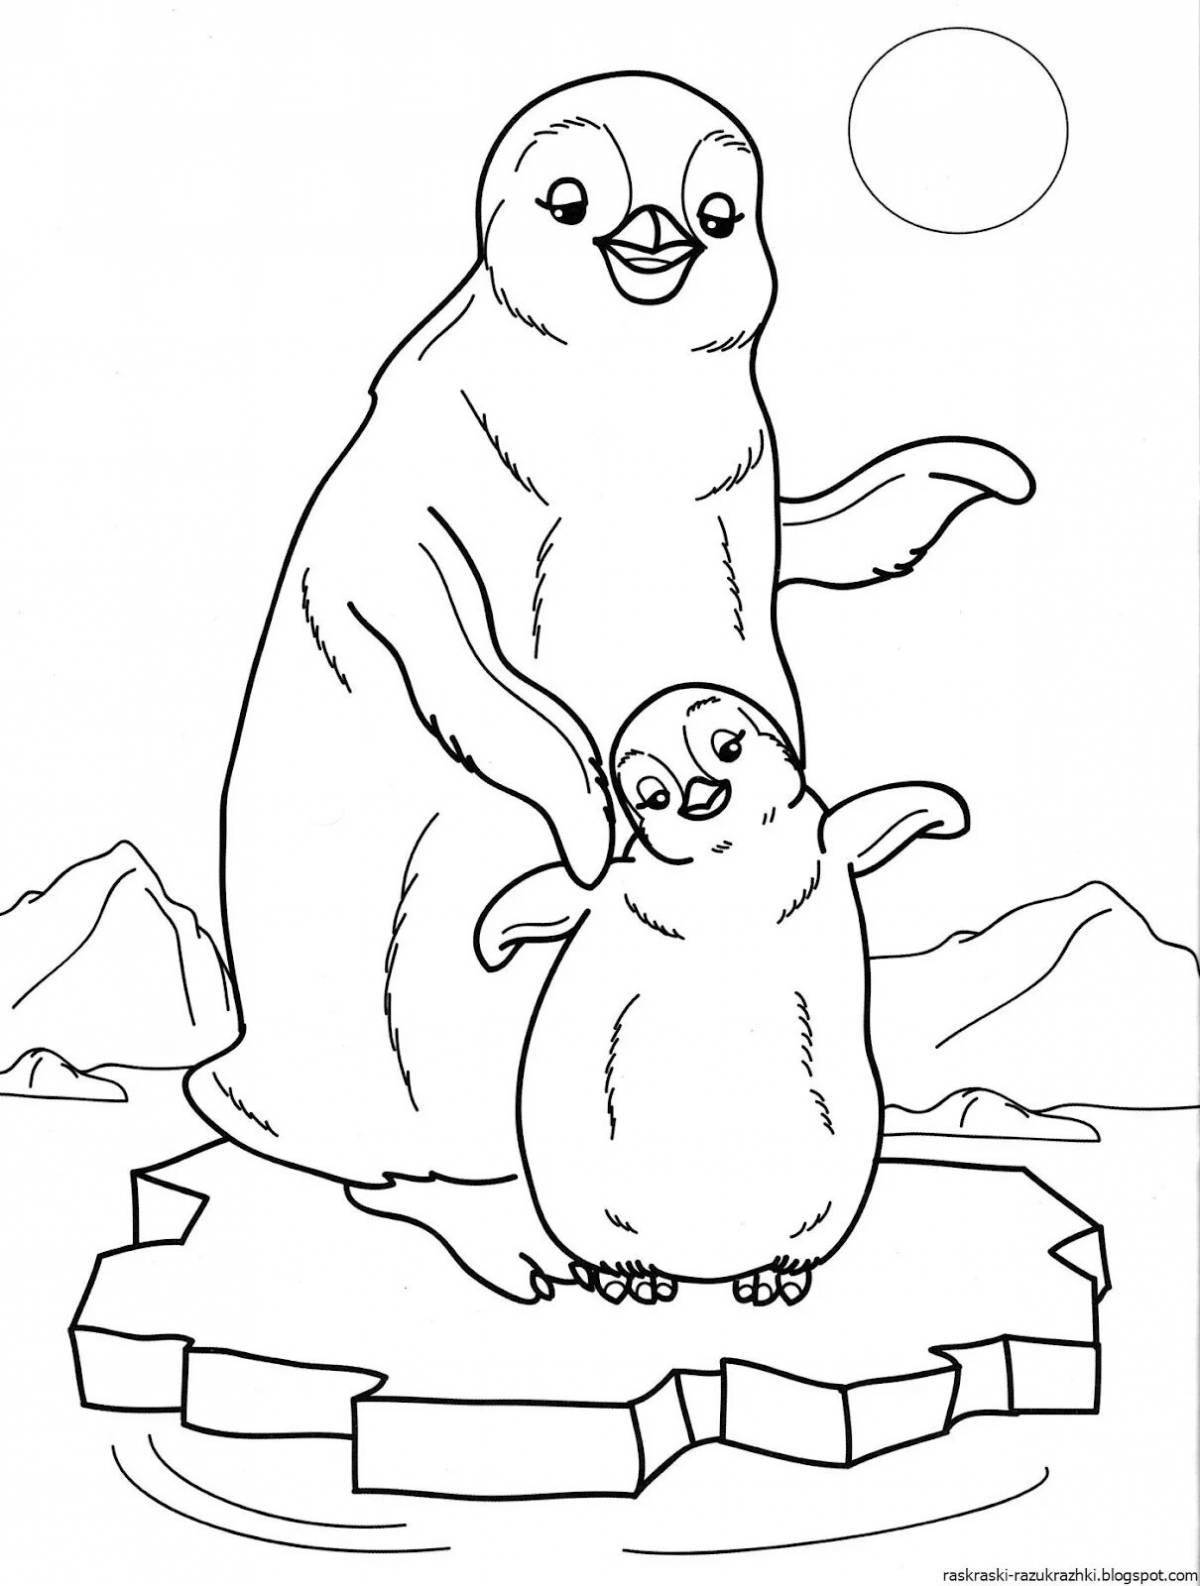 Fancy northern animals coloring pages for kindergarten